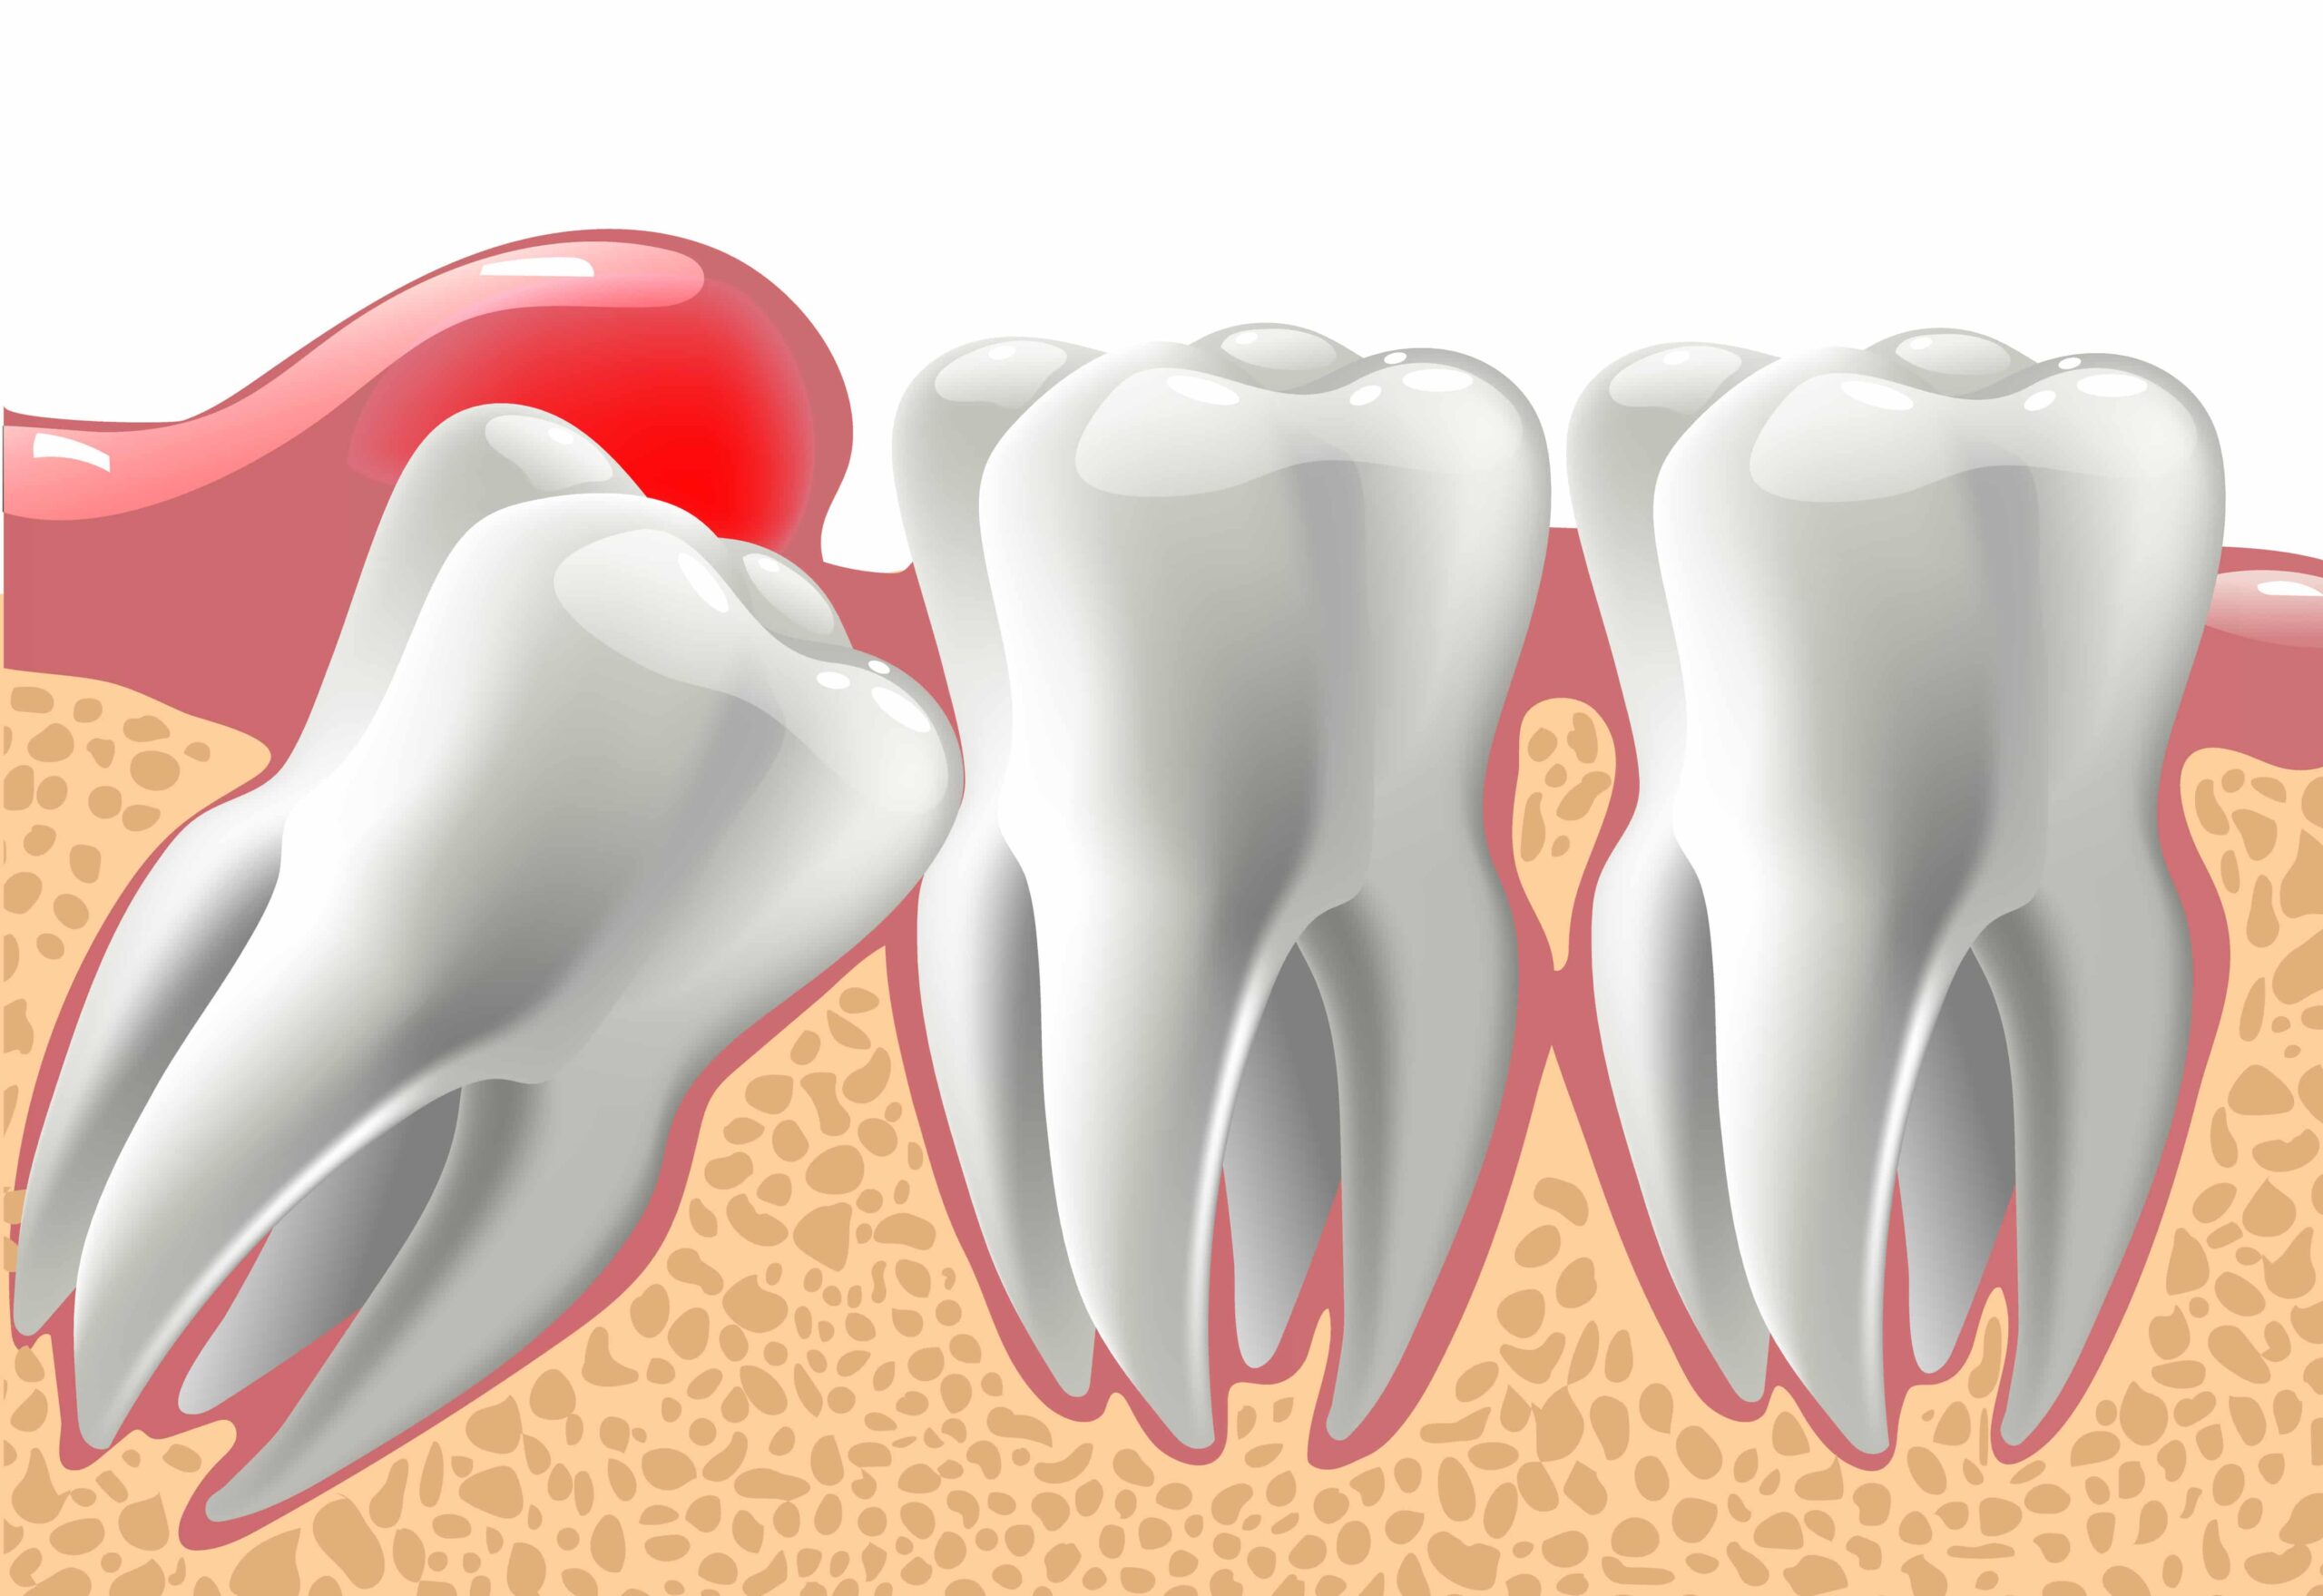 Pittsburgh Wisdom tooth extraction